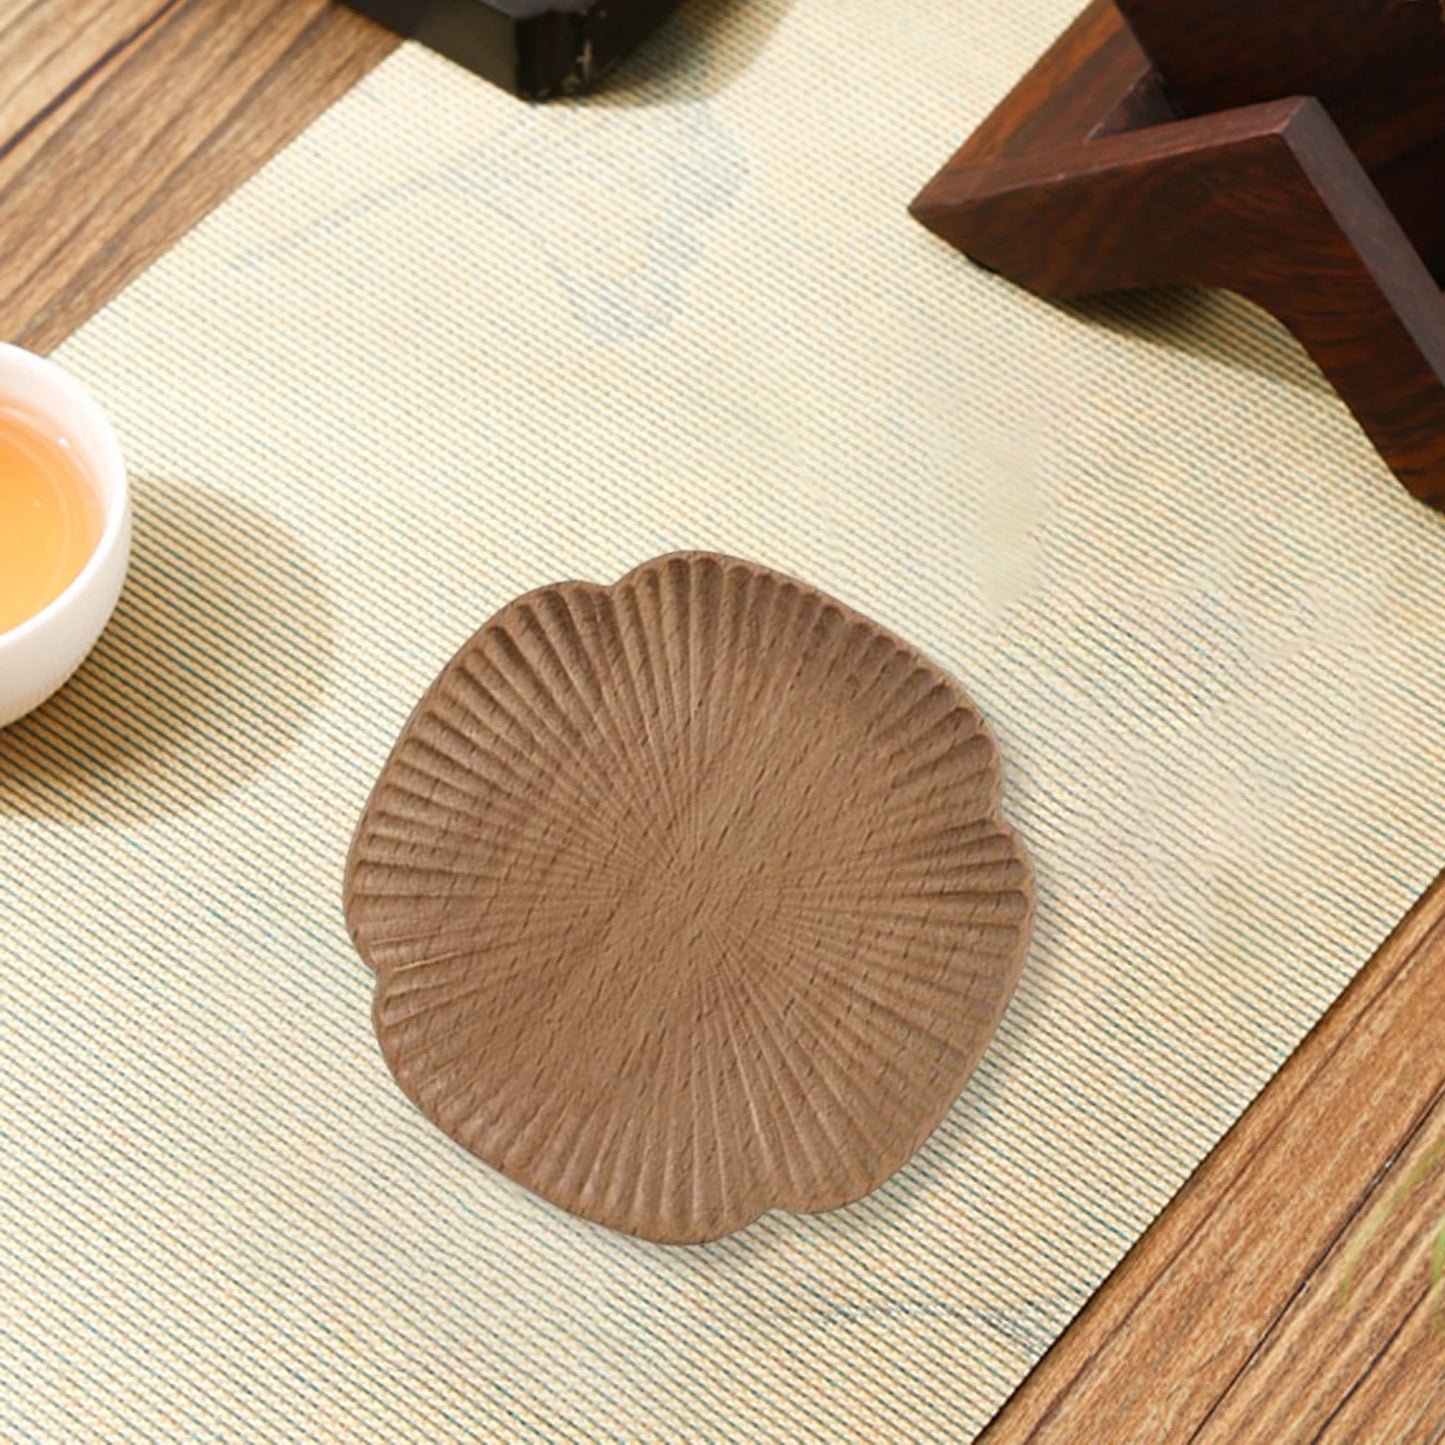 Wooden Coaster Cup Mat Flower Coffee Mug Placemat Home Decor Storage Supplies Cup Holder Washable for Living Room Fridge Freezer